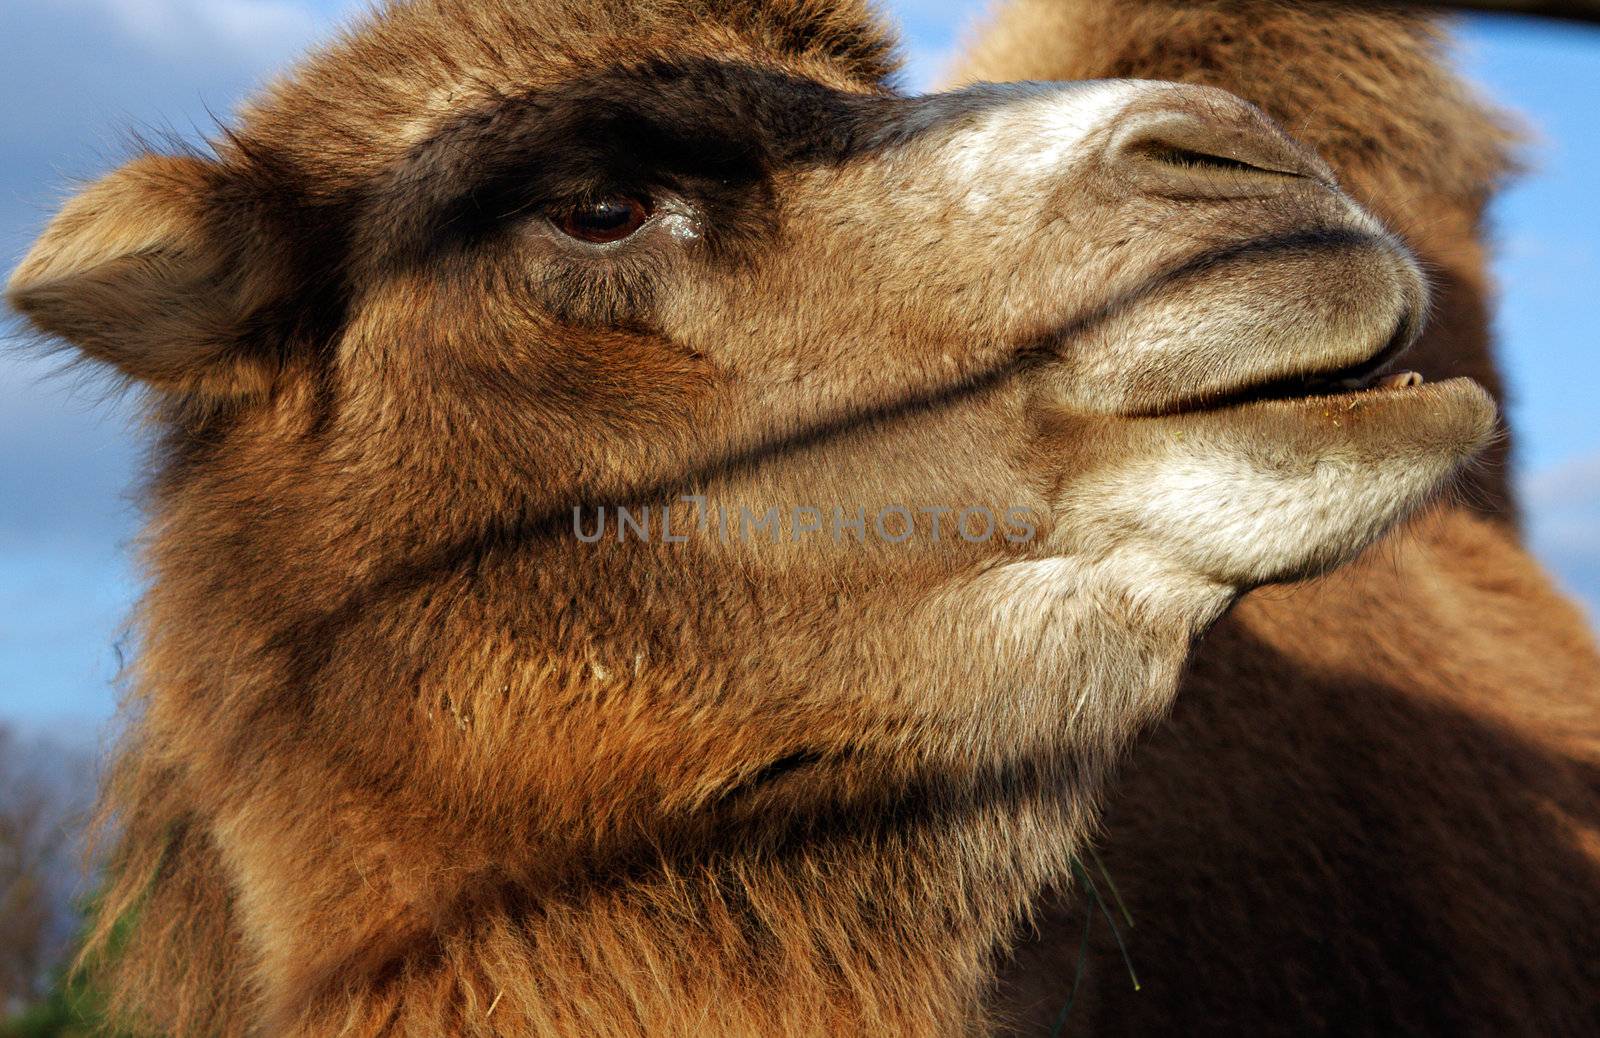 Closeup of a camel's head with body in the background